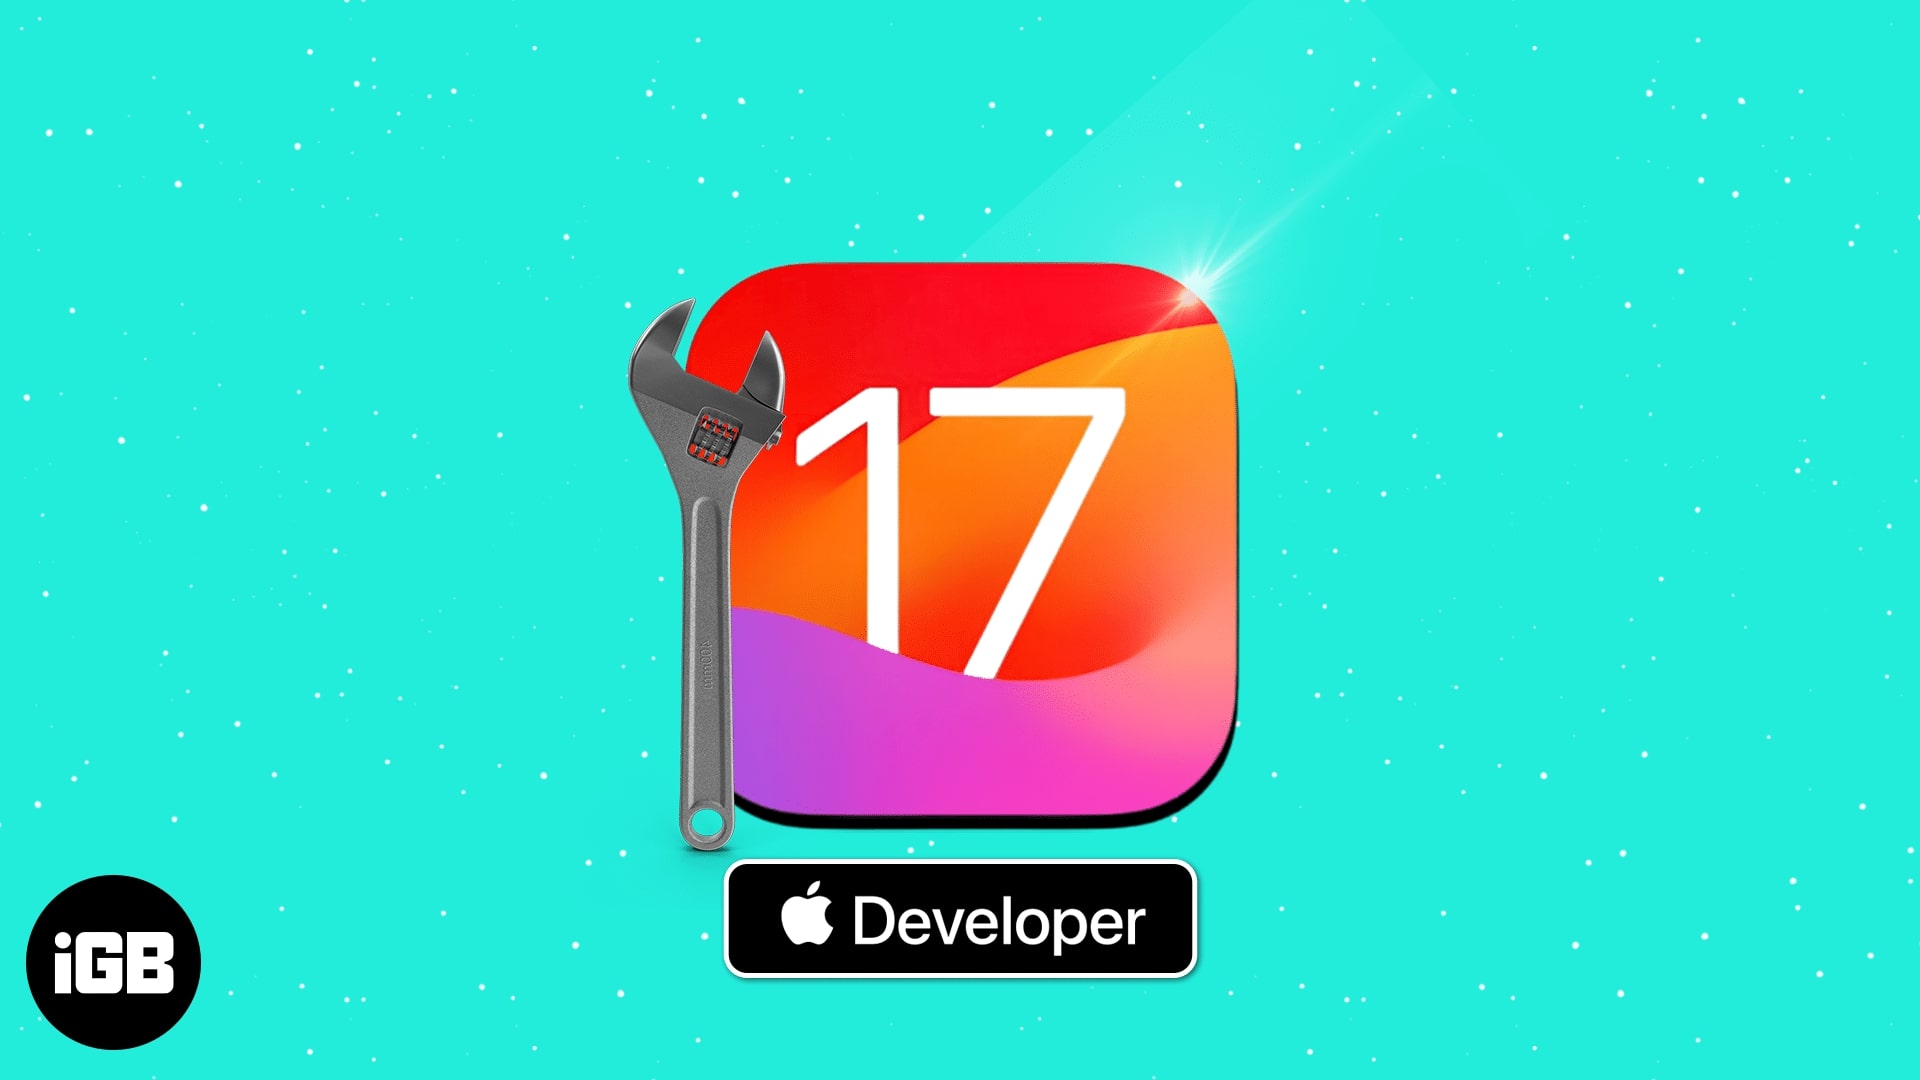 How to download and install iOS 17.6 beta 4 on iPhone